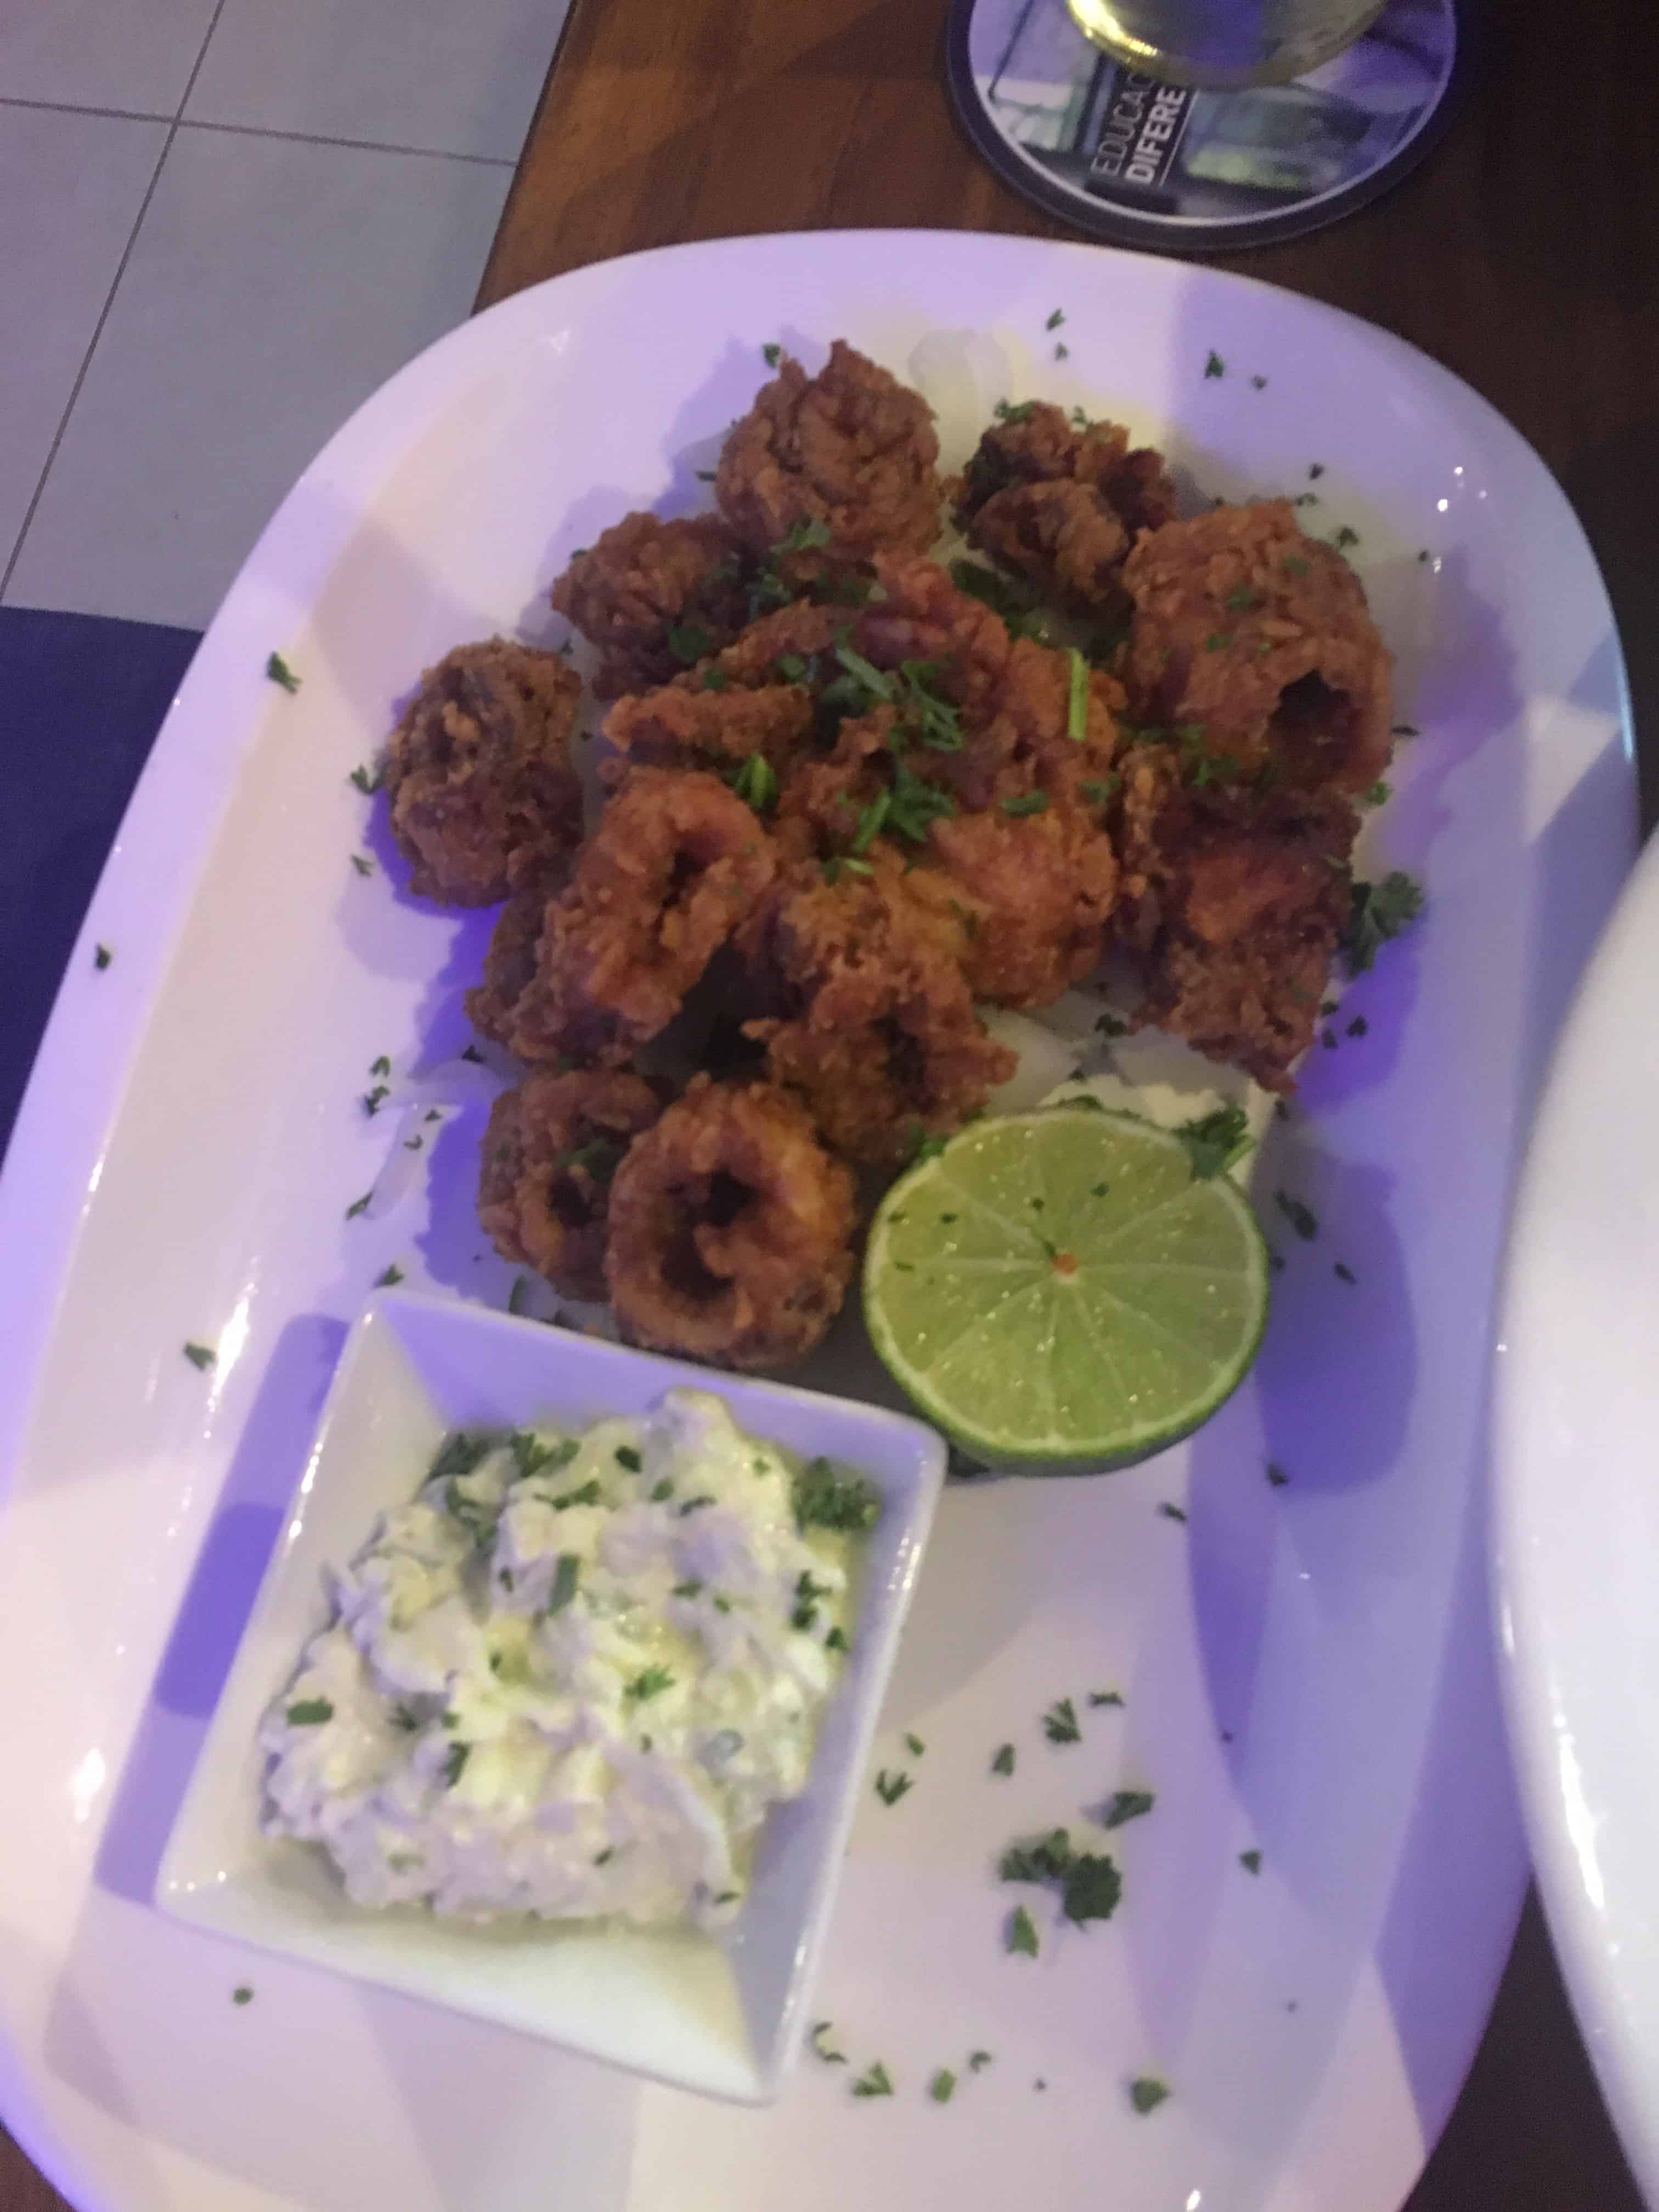 Calamari at The Greek Connection in Medellín, Antioquia, Colombia